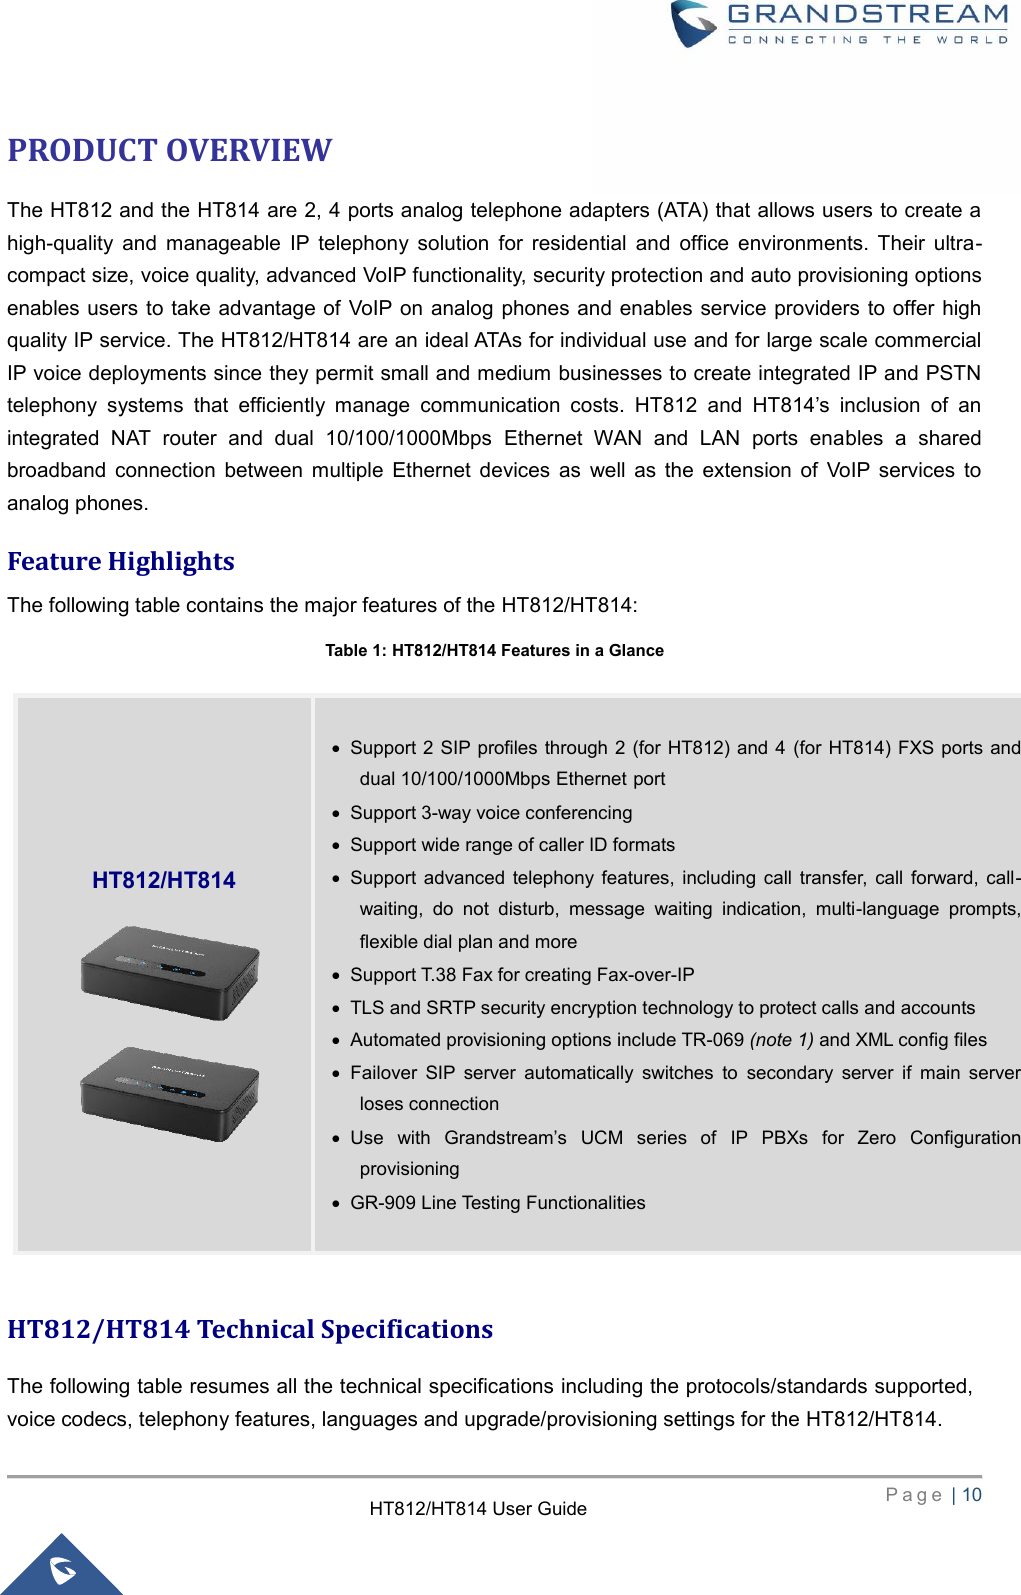     P a g e  | 10        HT812/HT814 User Guide  PRODUCT OVERVIEW The HT812 and the HT814 are 2, 4 ports analog telephone adapters (ATA) that allows users to create a high-quality  and  manageable  IP  telephony  solution  for  residential  and  office  environments.  Their  ultra-compact size, voice quality, advanced VoIP functionality, security protection and auto provisioning options enables users to take advantage of  VoIP on  analog phones and enables service providers to offer high quality IP service. The HT812/HT814 are an ideal ATAs for individual use and for large scale commercial IP voice deployments since they permit small and medium businesses to create integrated IP and PSTN telephony  systems  that  efficiently  manage  communication  costs.  HT812  and  HT814’s  inclusion  of  an integrated  NAT  router  and  dual  10/100/1000Mbps  Ethernet  WAN  and  LAN  ports  enables  a  shared broadband  connection  between  multiple  Ethernet  devices  as  well  as  the  extension  of  VoIP  services  to analog phones. Feature Highlights The following table contains the major features of the HT812/HT814: Table 1: HT812/HT814 Features in a Glance  HT812/HT814 Technical Specifications   The following table resumes all the technical specifications including the protocols/standards supported, voice codecs, telephony features, languages and upgrade/provisioning settings for the HT812/HT814.    HT812/HT814   Support 2 SIP profiles through 2 (for HT812) and 4 (for  HT814) FXS ports and dual 10/100/1000Mbps Ethernet port  Support 3-way voice conferencing  Support wide range of caller ID formats  Support  advanced  telephony  features, including  call  transfer,  call  forward,  call-waiting,  do  not  disturb,  message  waiting  indication,  multi-language  prompts, flexible dial plan and more  Support T.38 Fax for creating Fax-over-IP    TLS and SRTP security encryption technology to protect calls and accounts  Automated provisioning options include TR-069 (note 1) and XML config files  Failover  SIP  server  automatically  switches  to  secondary  server  if  main  server loses connection  Use  with  Grandstream’s  UCM  series  of  IP  PBXs  for  Zero  Configuration provisioning  GR-909 Line Testing Functionalities    